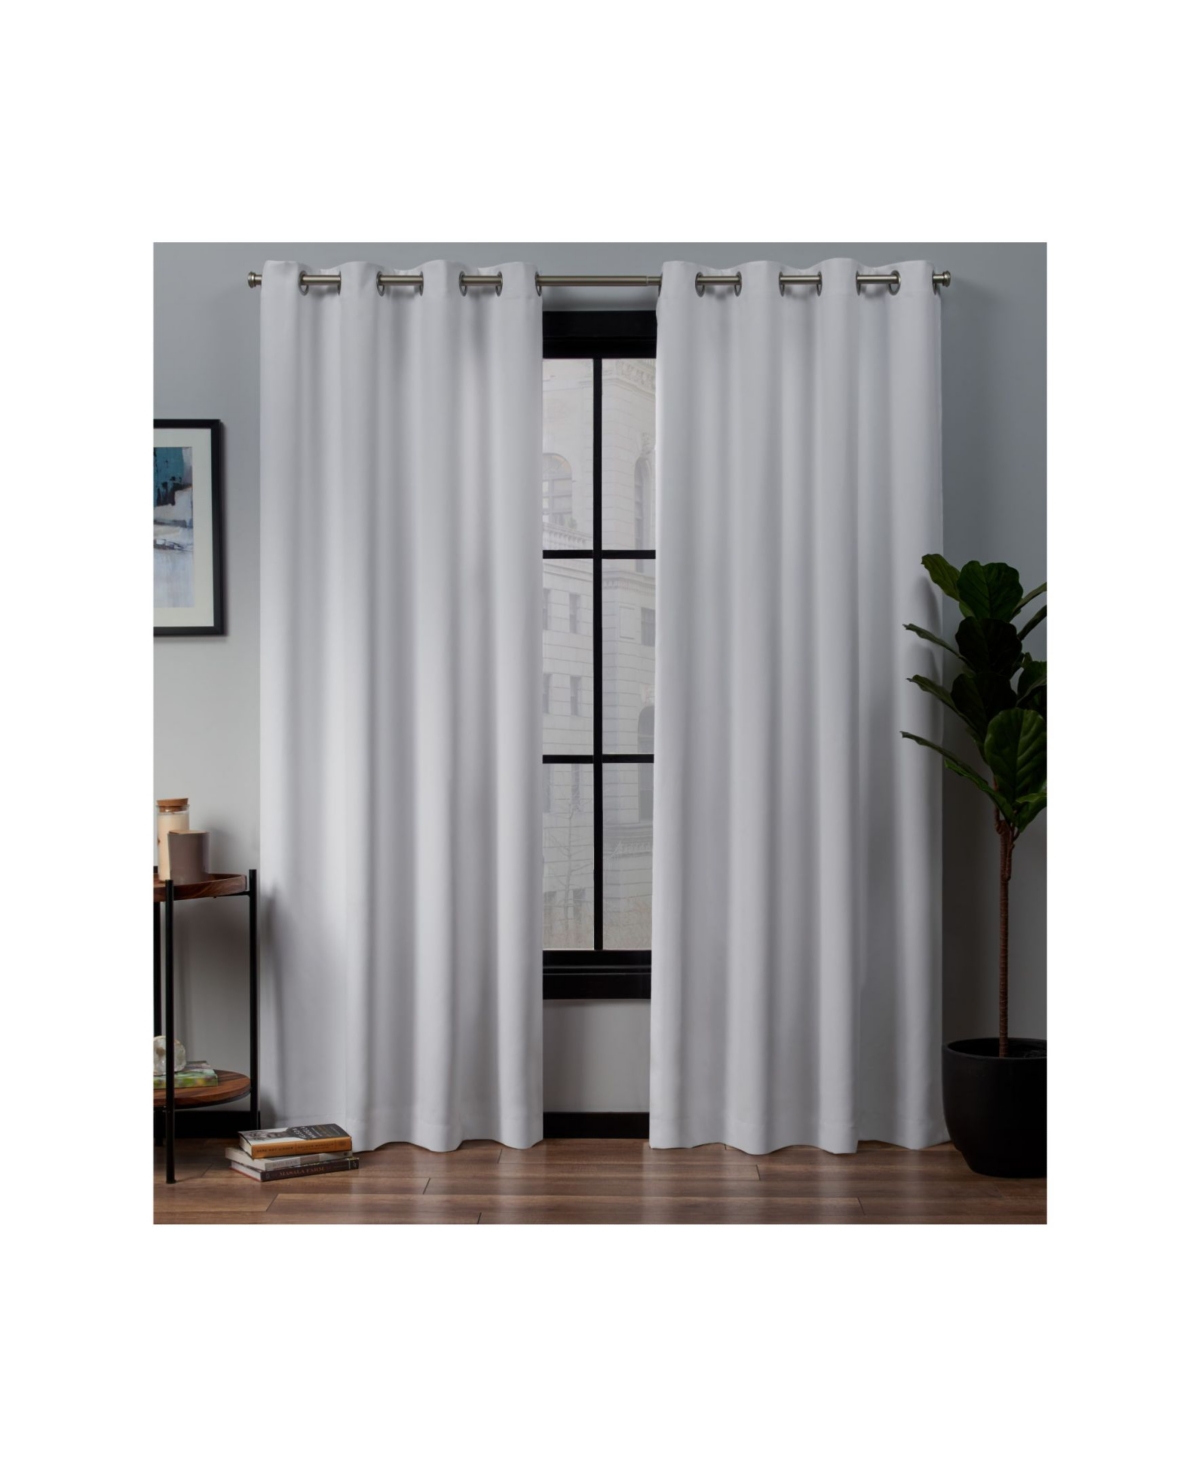 Academy Total Blackout Grommet Top Curtain Panel Pair, 52" x 84" - White